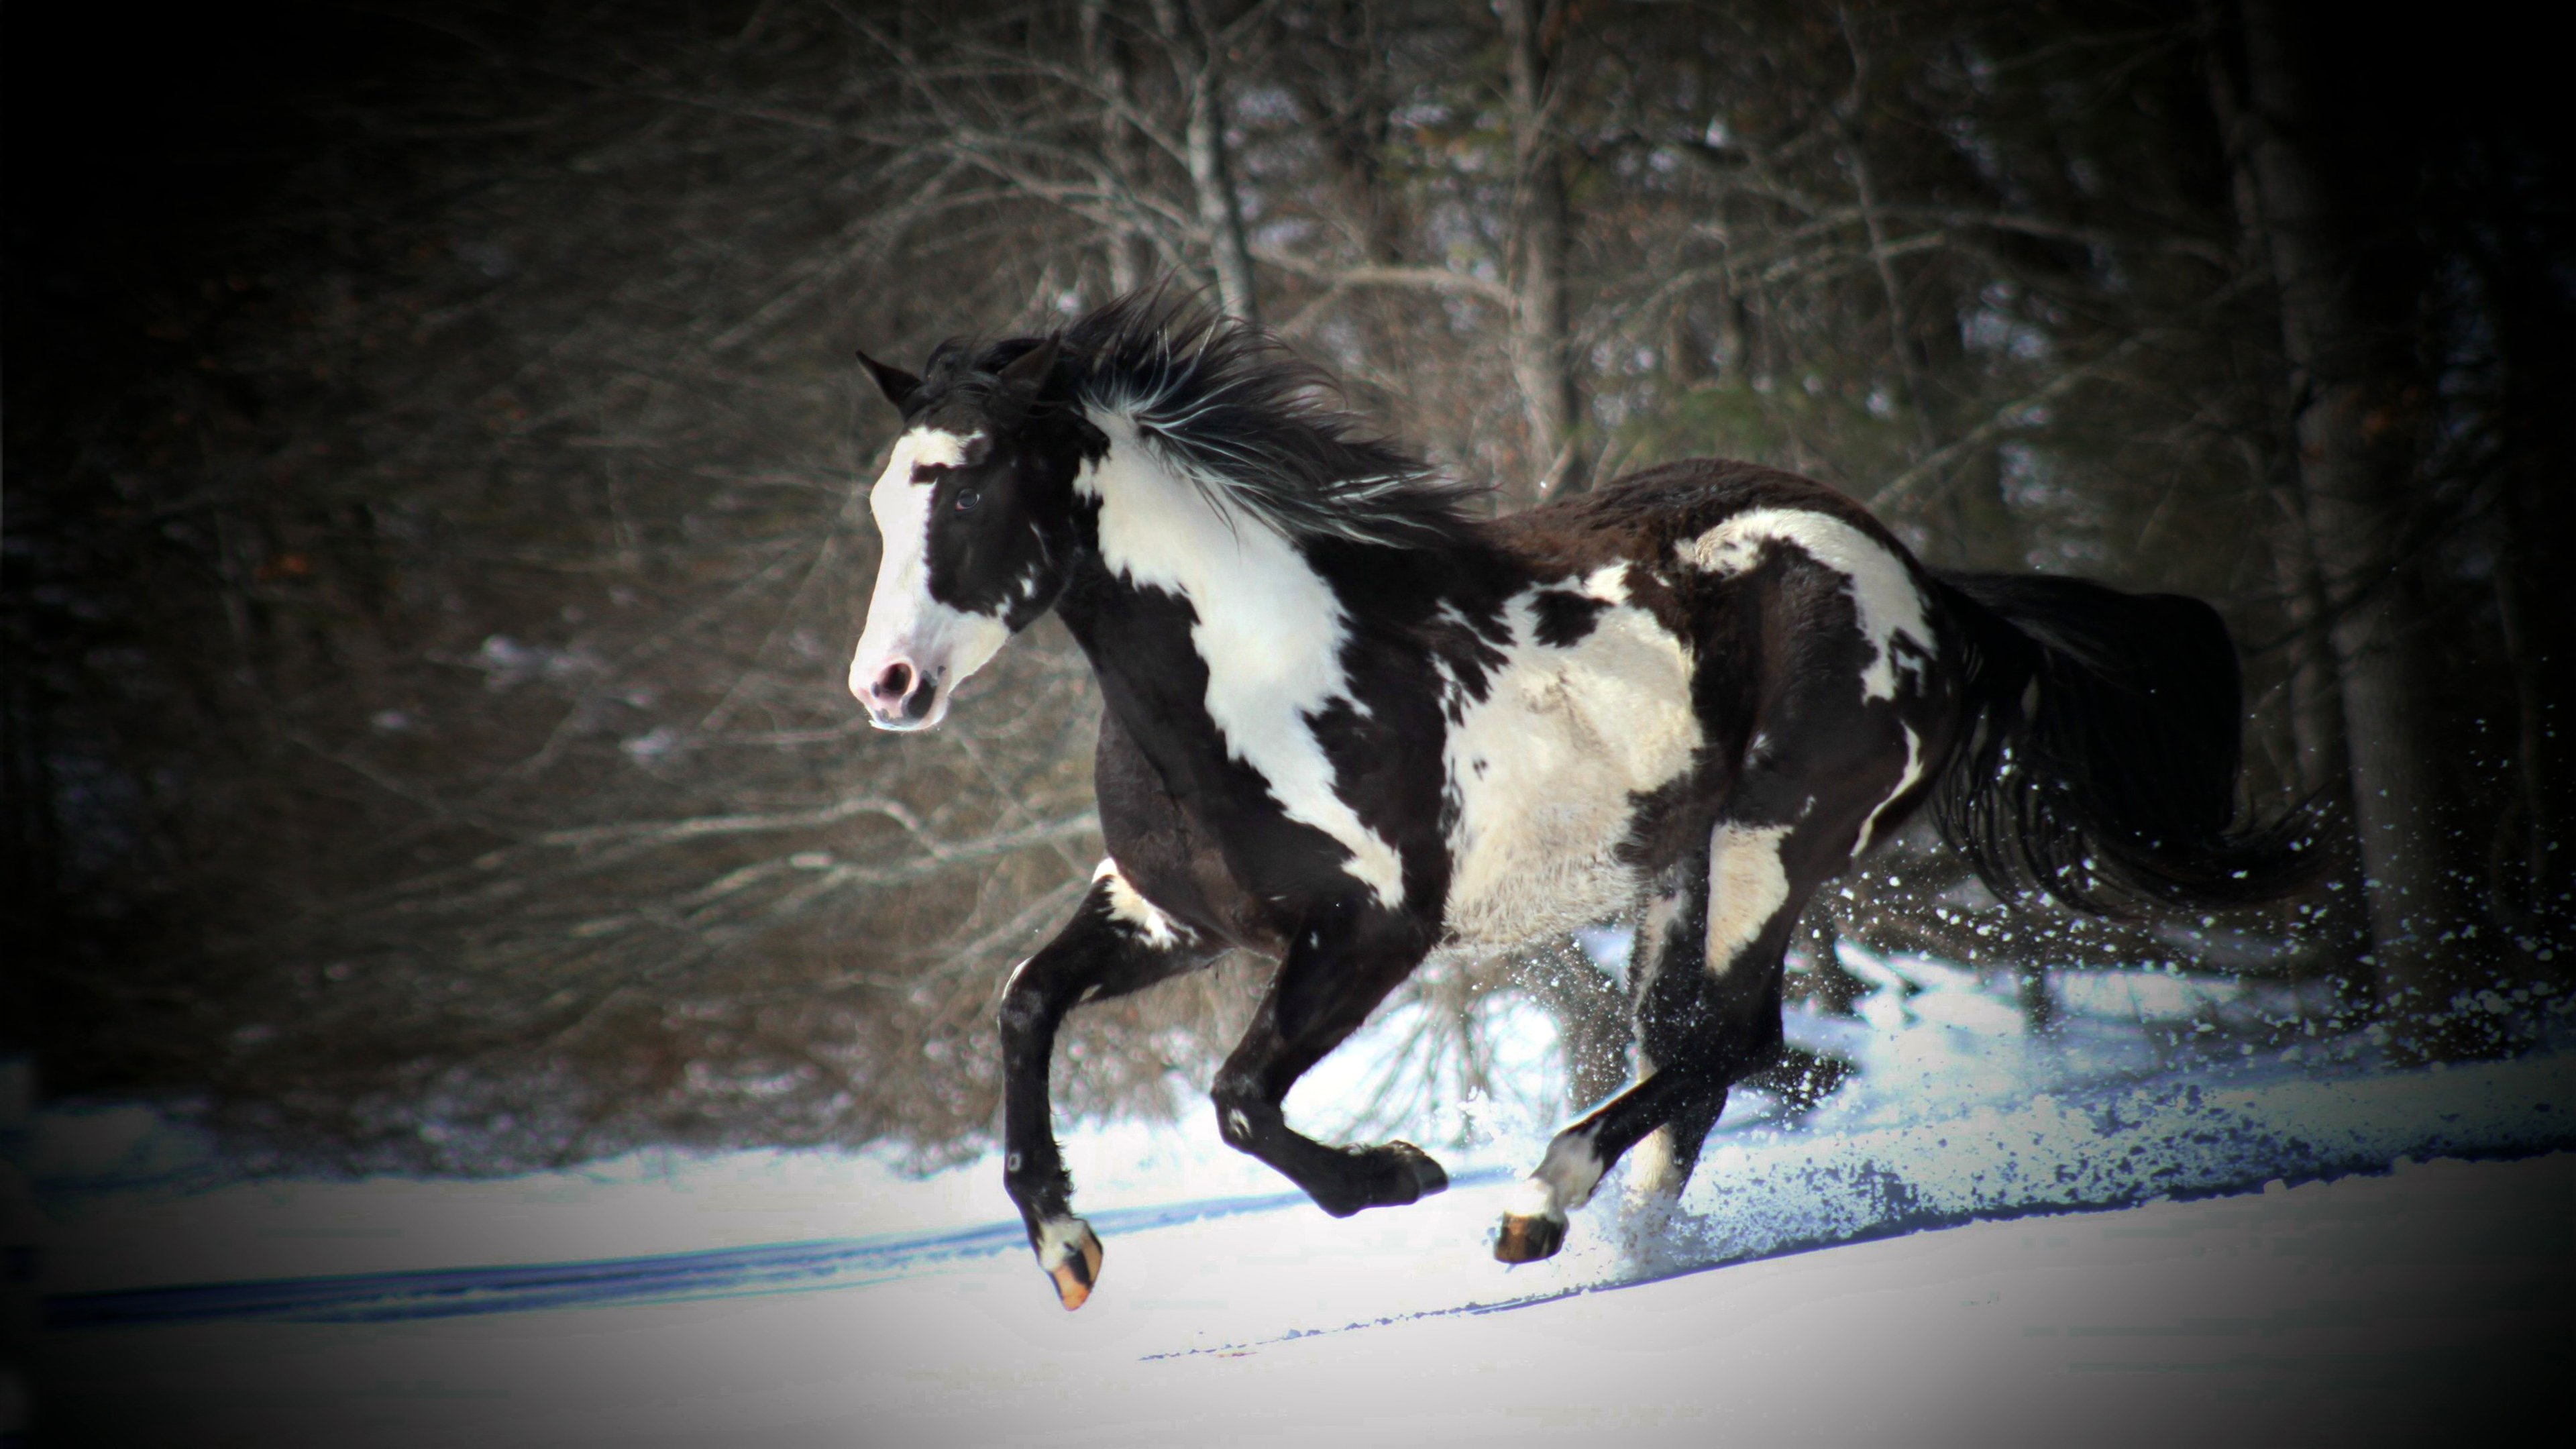 Black And White Horse Running In Snow Desktop Wallpaper Background Free Download, Wallpaper13.com